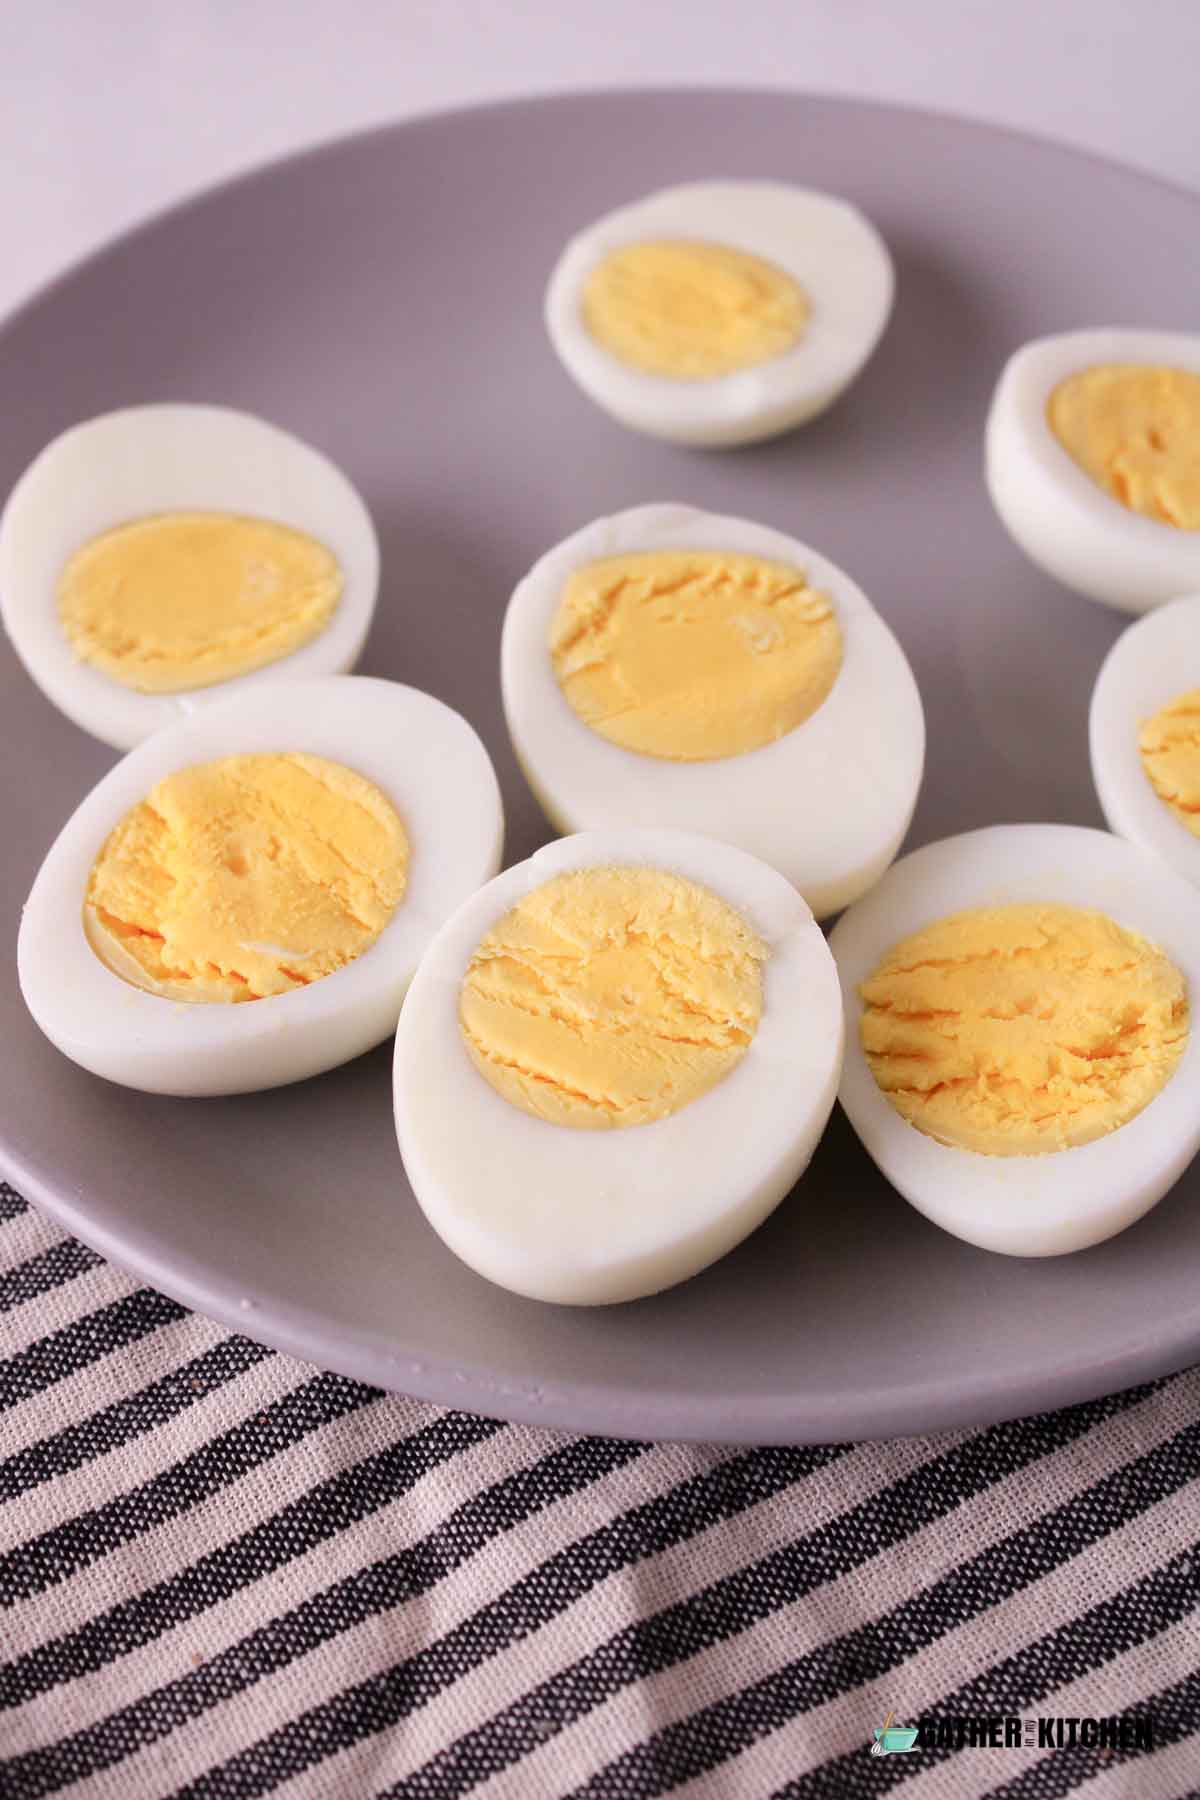 Peeled and cut in half hard boiled eggs on a plate.